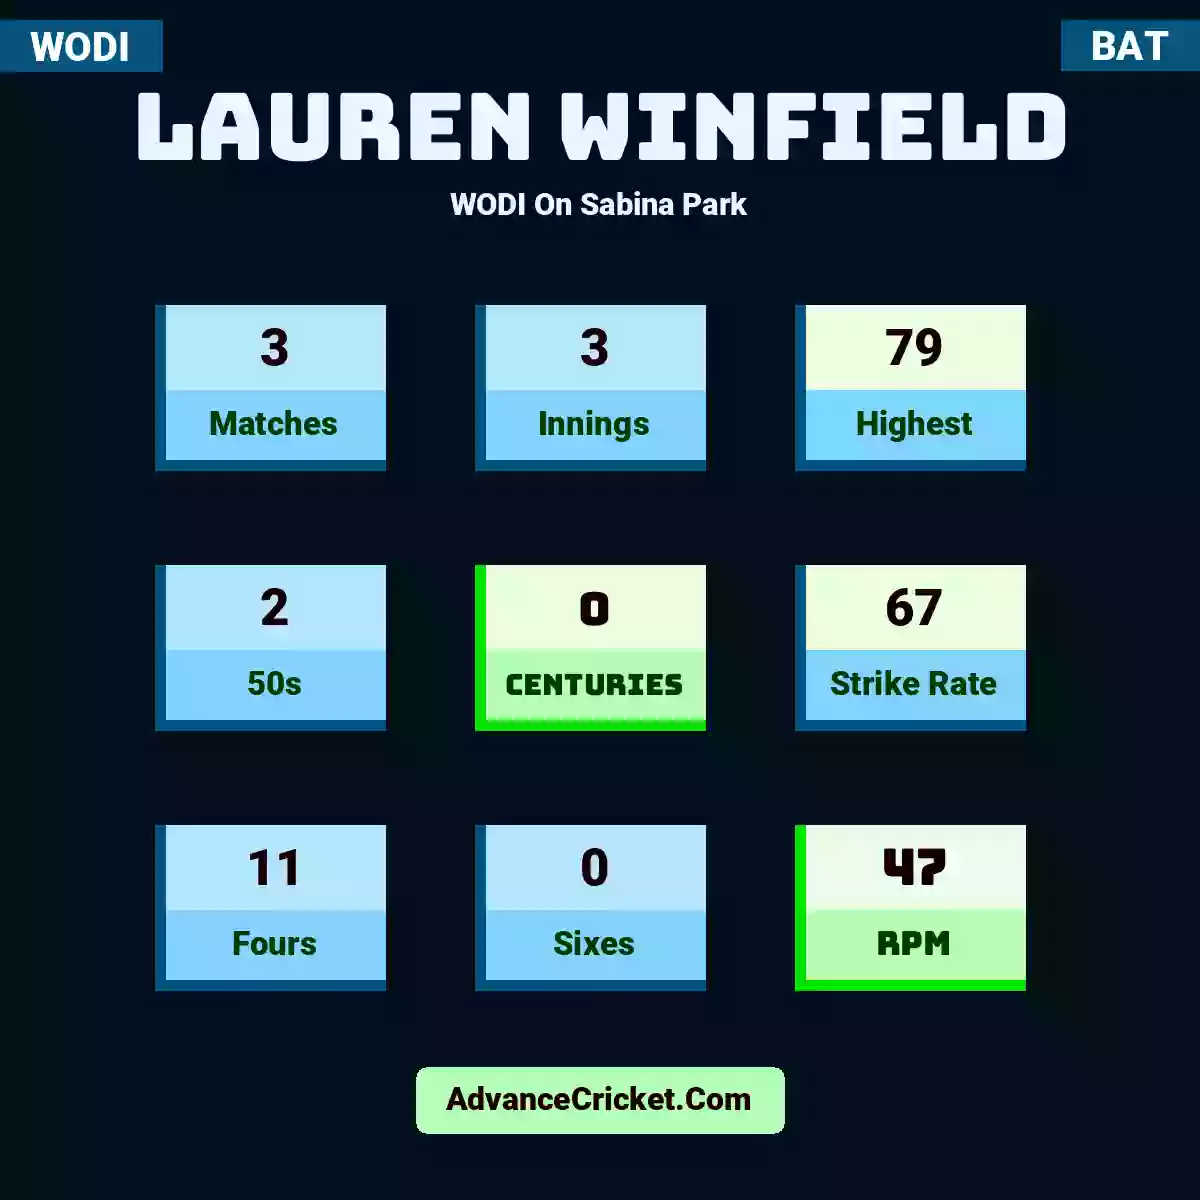 Lauren Winfield WODI  On Sabina Park, Lauren Winfield played 3 matches, scored 79 runs as highest, 2 half-centuries, and 0 centuries, with a strike rate of 67. L.Winfield hit 11 fours and 0 sixes, with an RPM of 47.